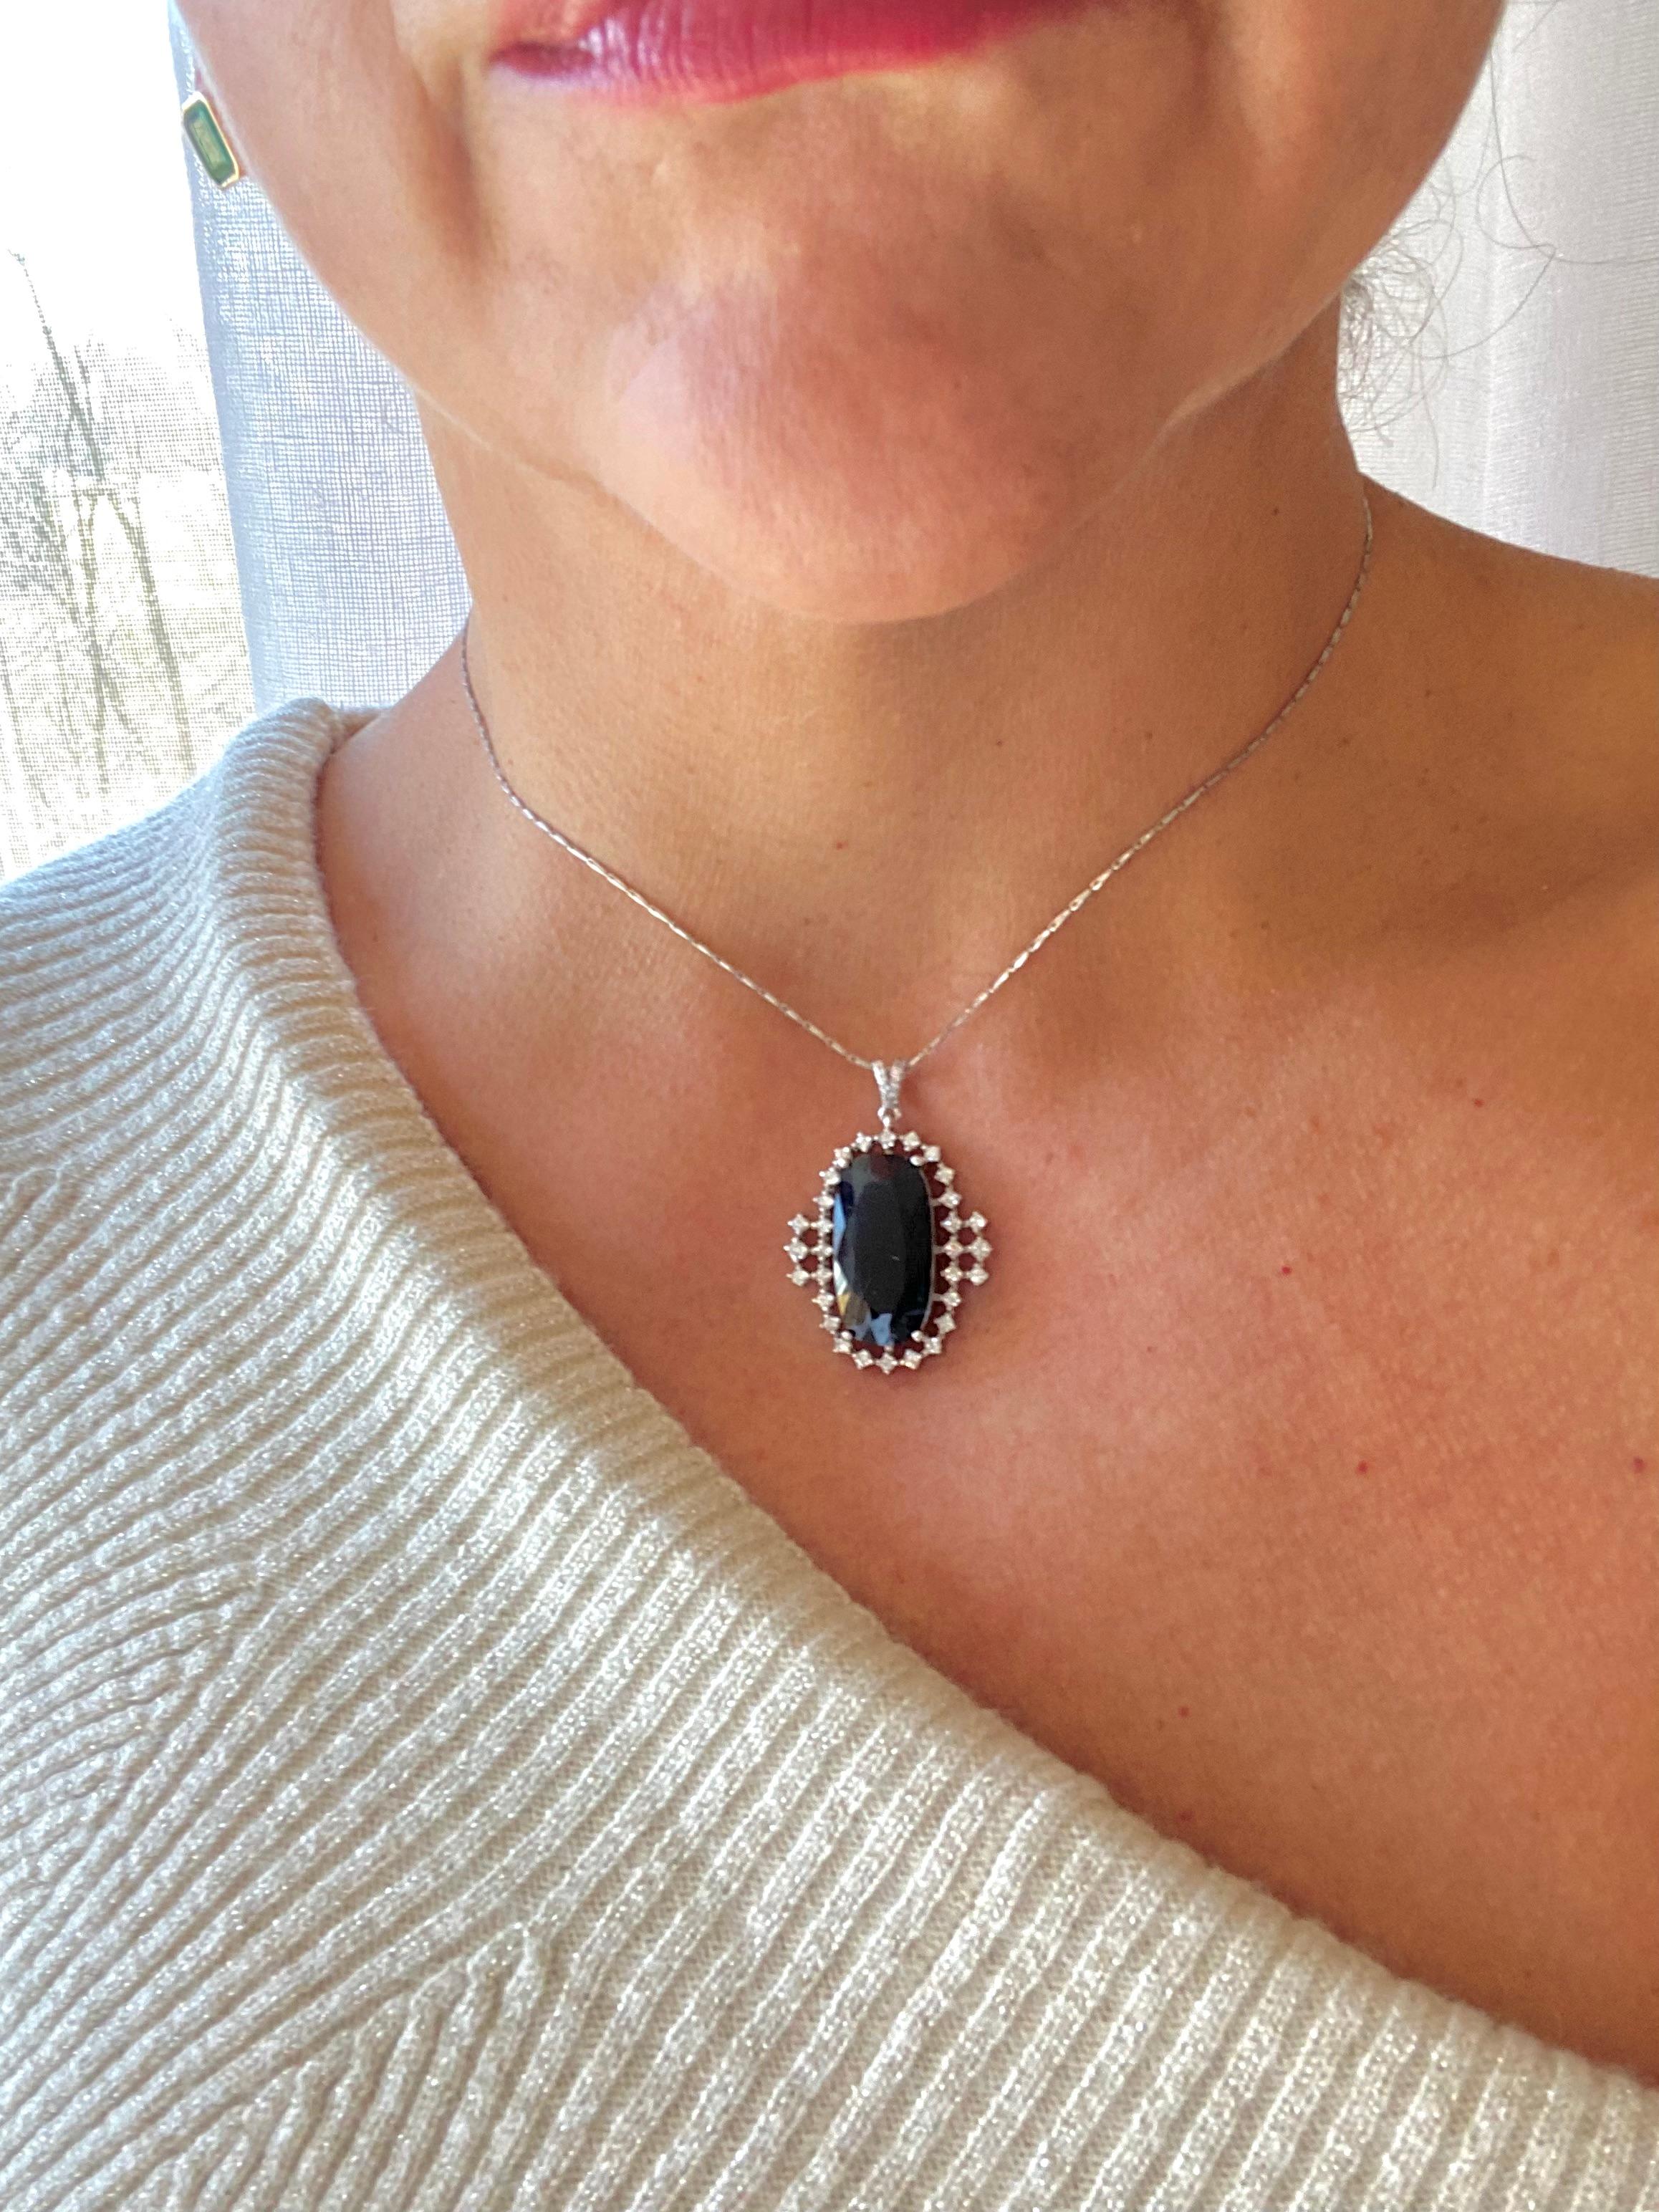 A Simple and Timeless Drop Pendant Showcasing a Large 22.57 Carat Midnight Blue Sapphire, Antique Cut Surrounded by a Row of Round Diamonds. The Solitaire Pendant is Made of Solid 18K White Gold. 
Primary Stones: Natural Sapphire 
Shape or Cut: